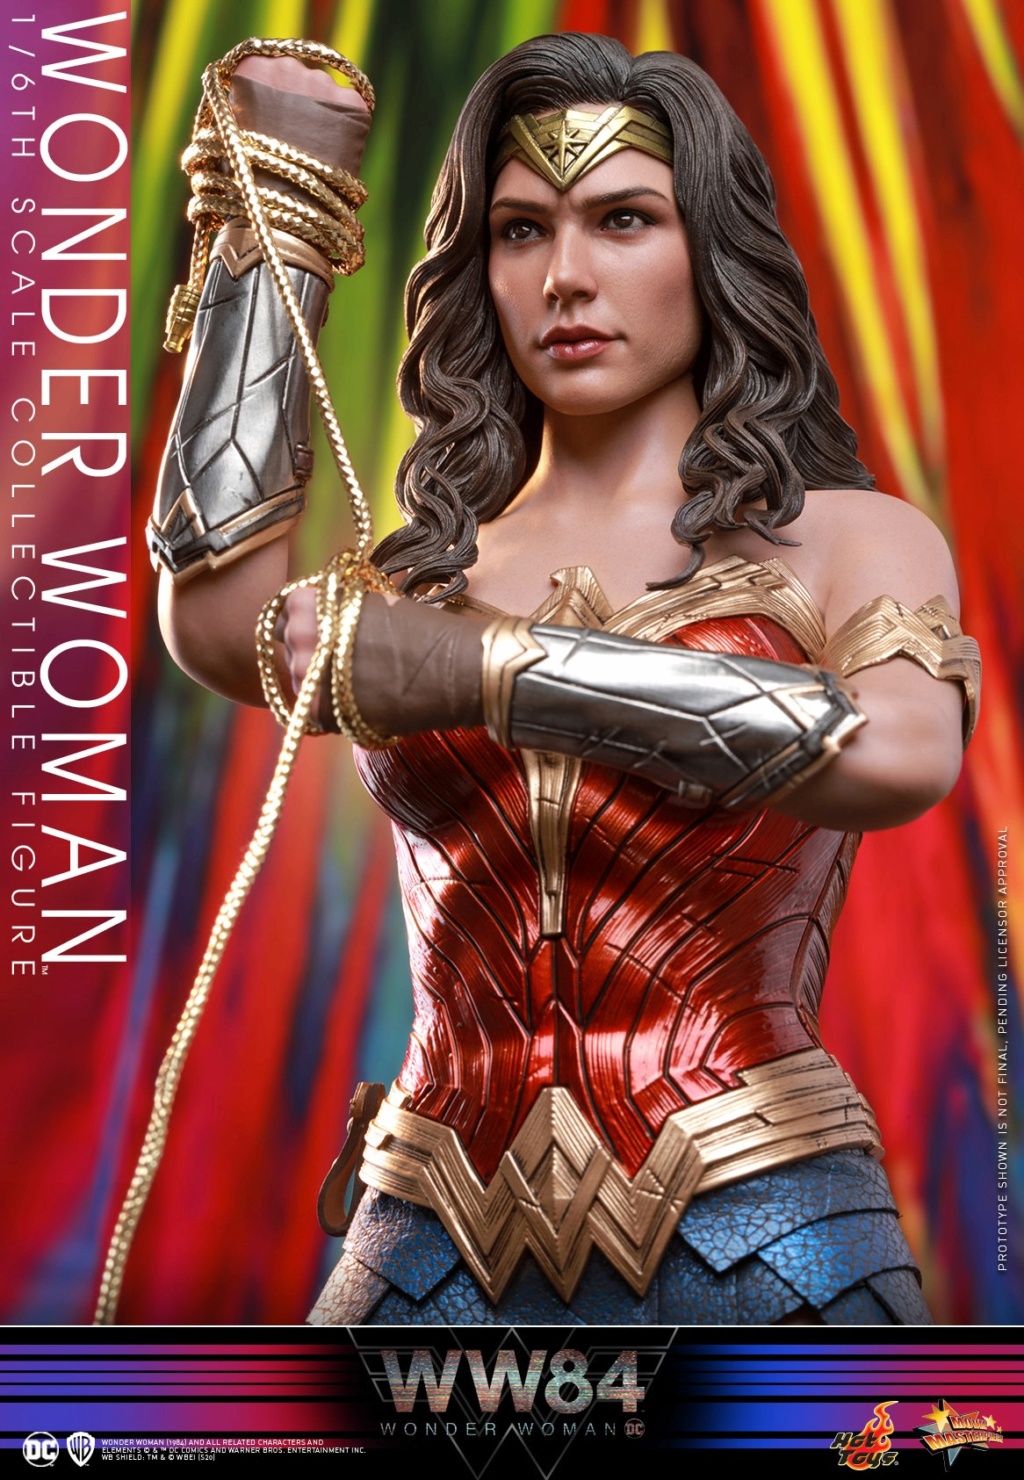 WonderWoman - NEW PRODUCT: HOT TOYS: WONDER WOMAN 1984 WONDER WOMAN 1/6TH SCALE COLLECTIBLE FIGURE 10284